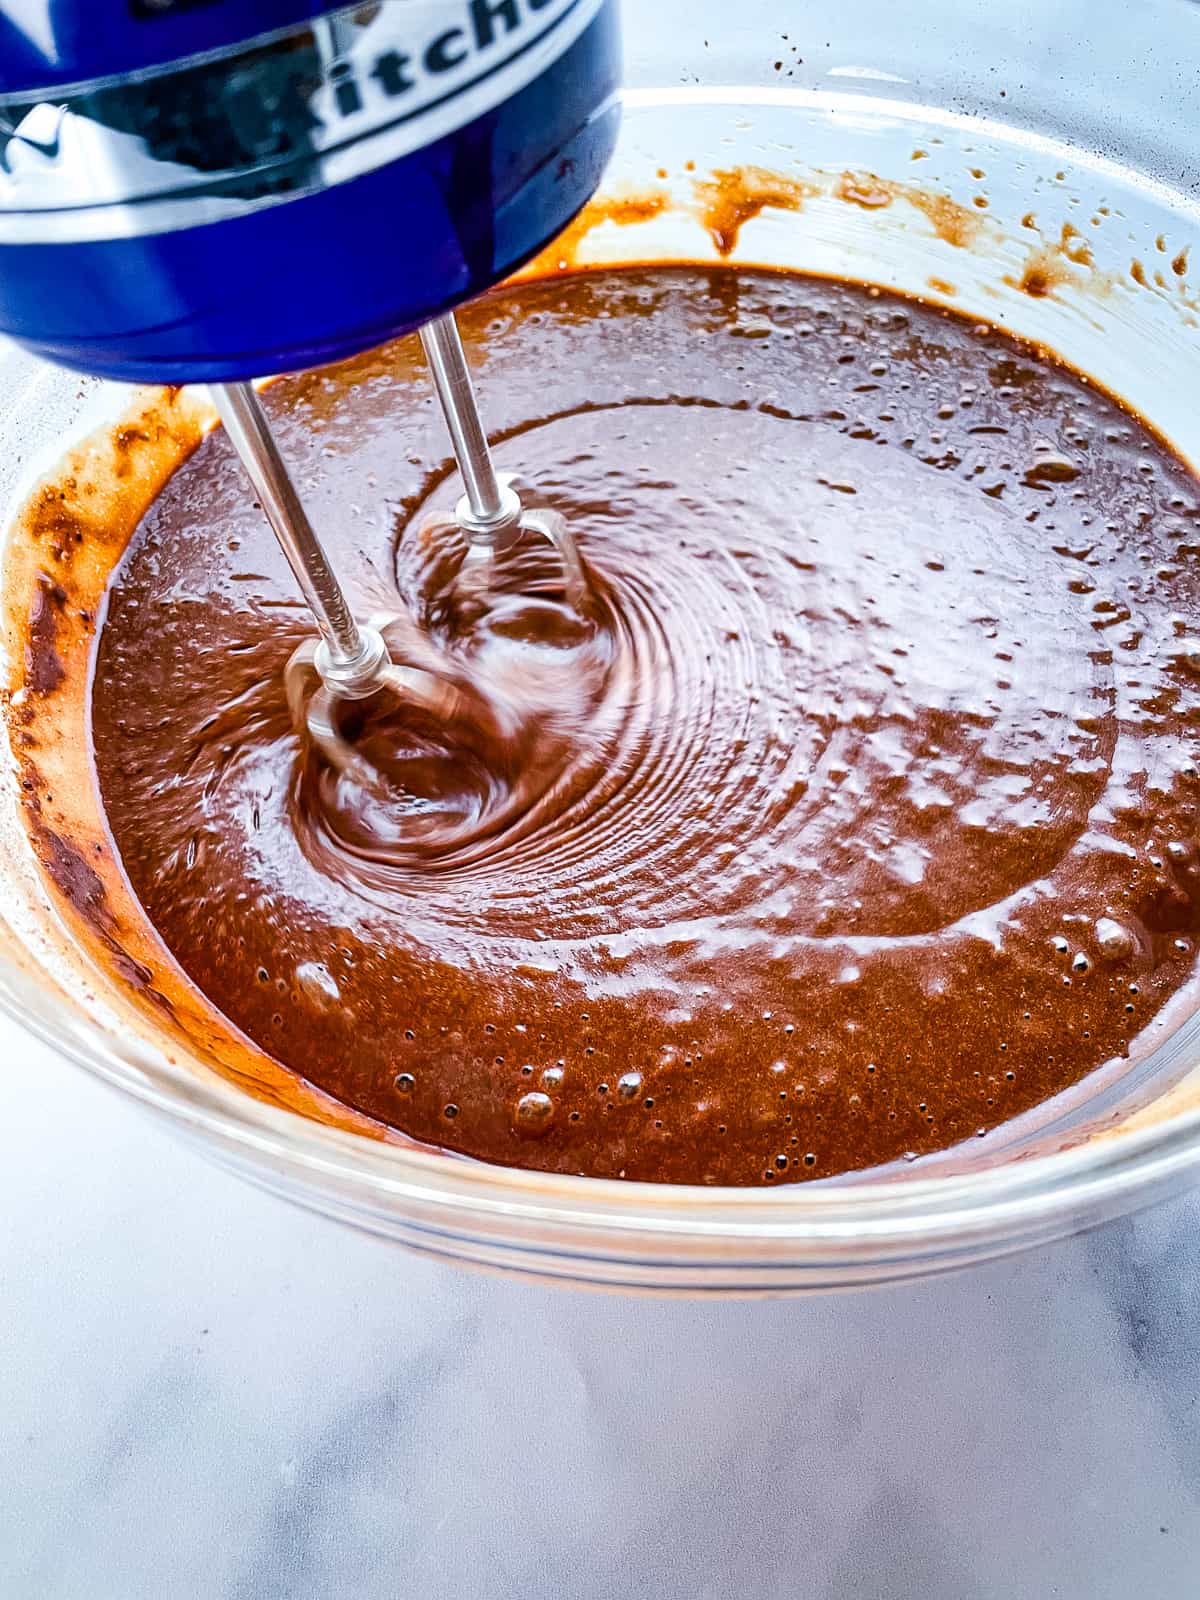 Gluten-free chocolate cake batter in a mixing bowl.